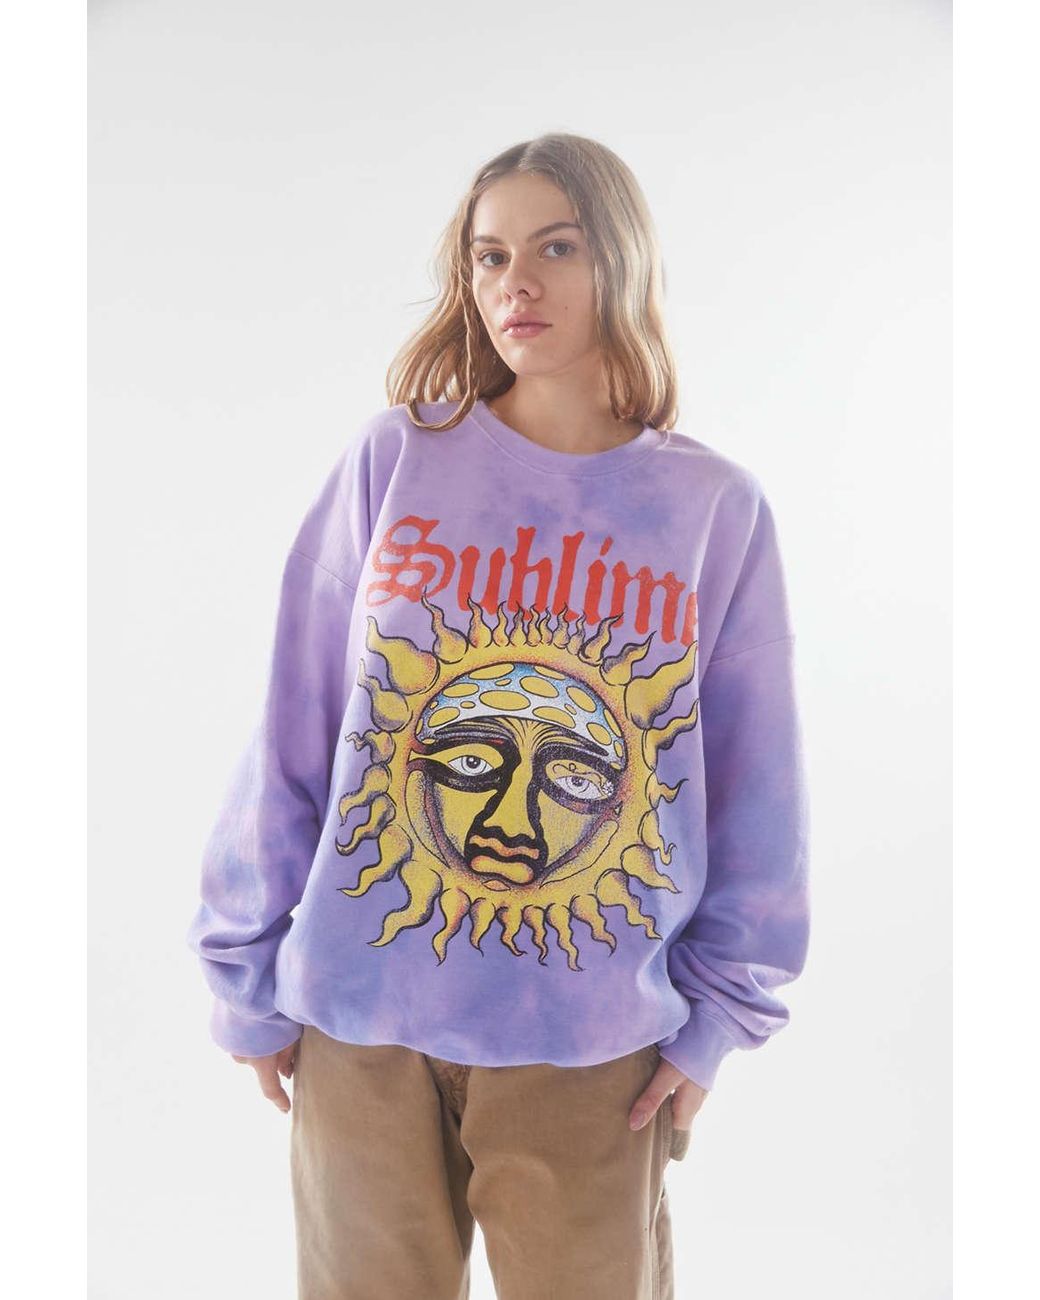 Urban Outfitters Sublime Tour Crew Neck Sweatshirt in Purple | Lyst Canada